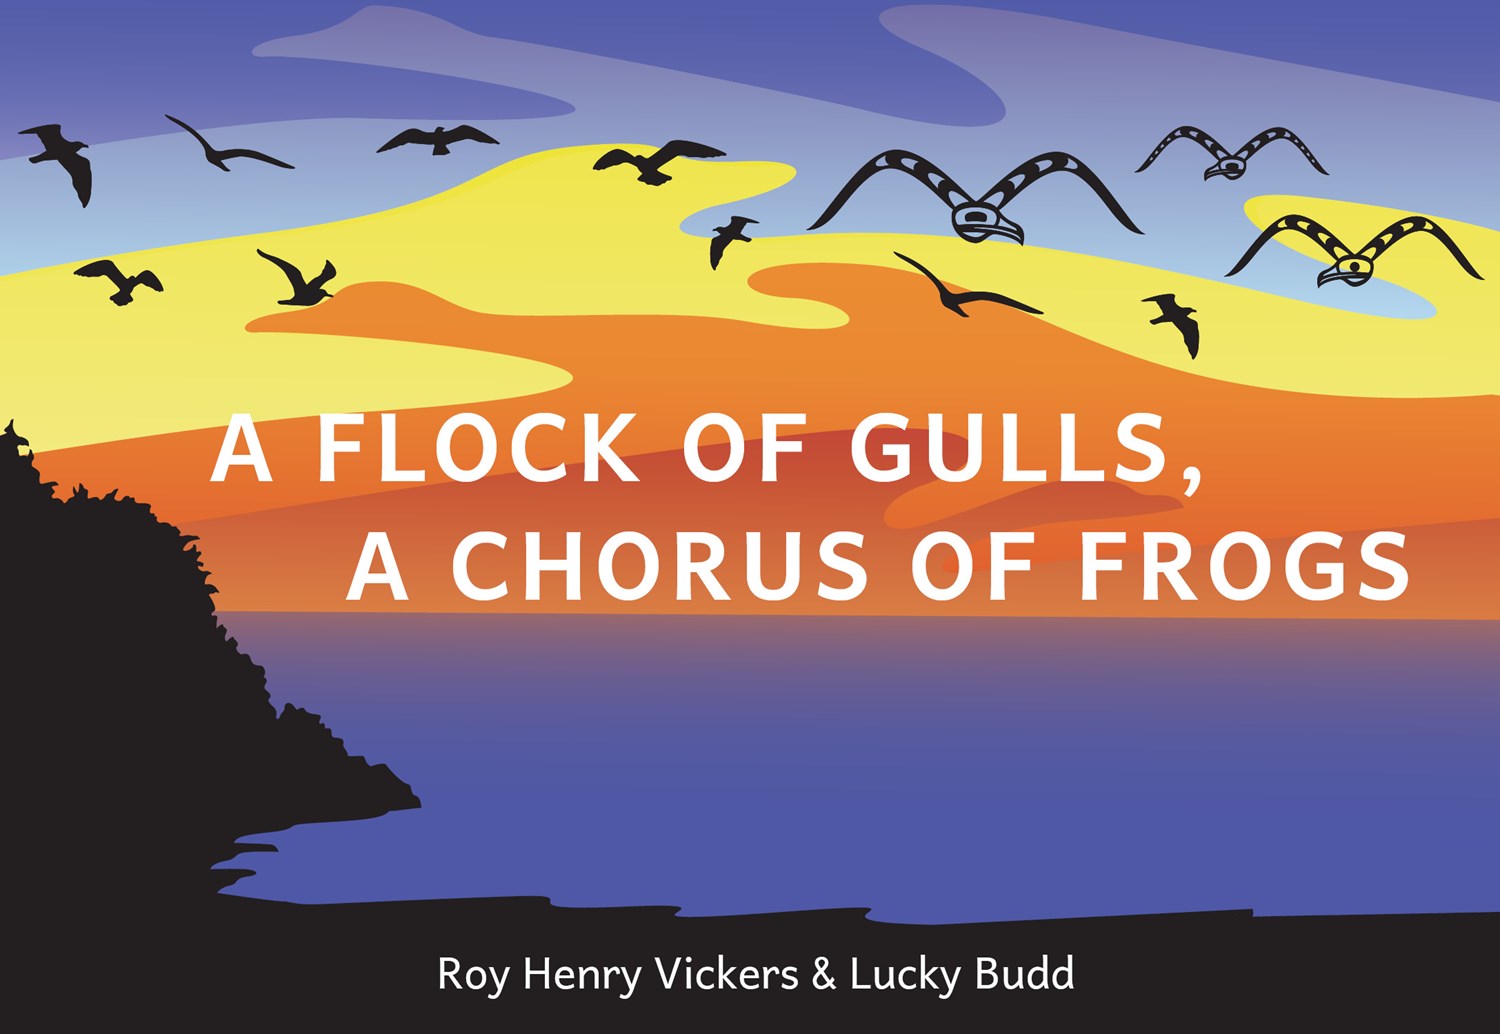 Flock of Seagulls, A, a Chorus of Frogs